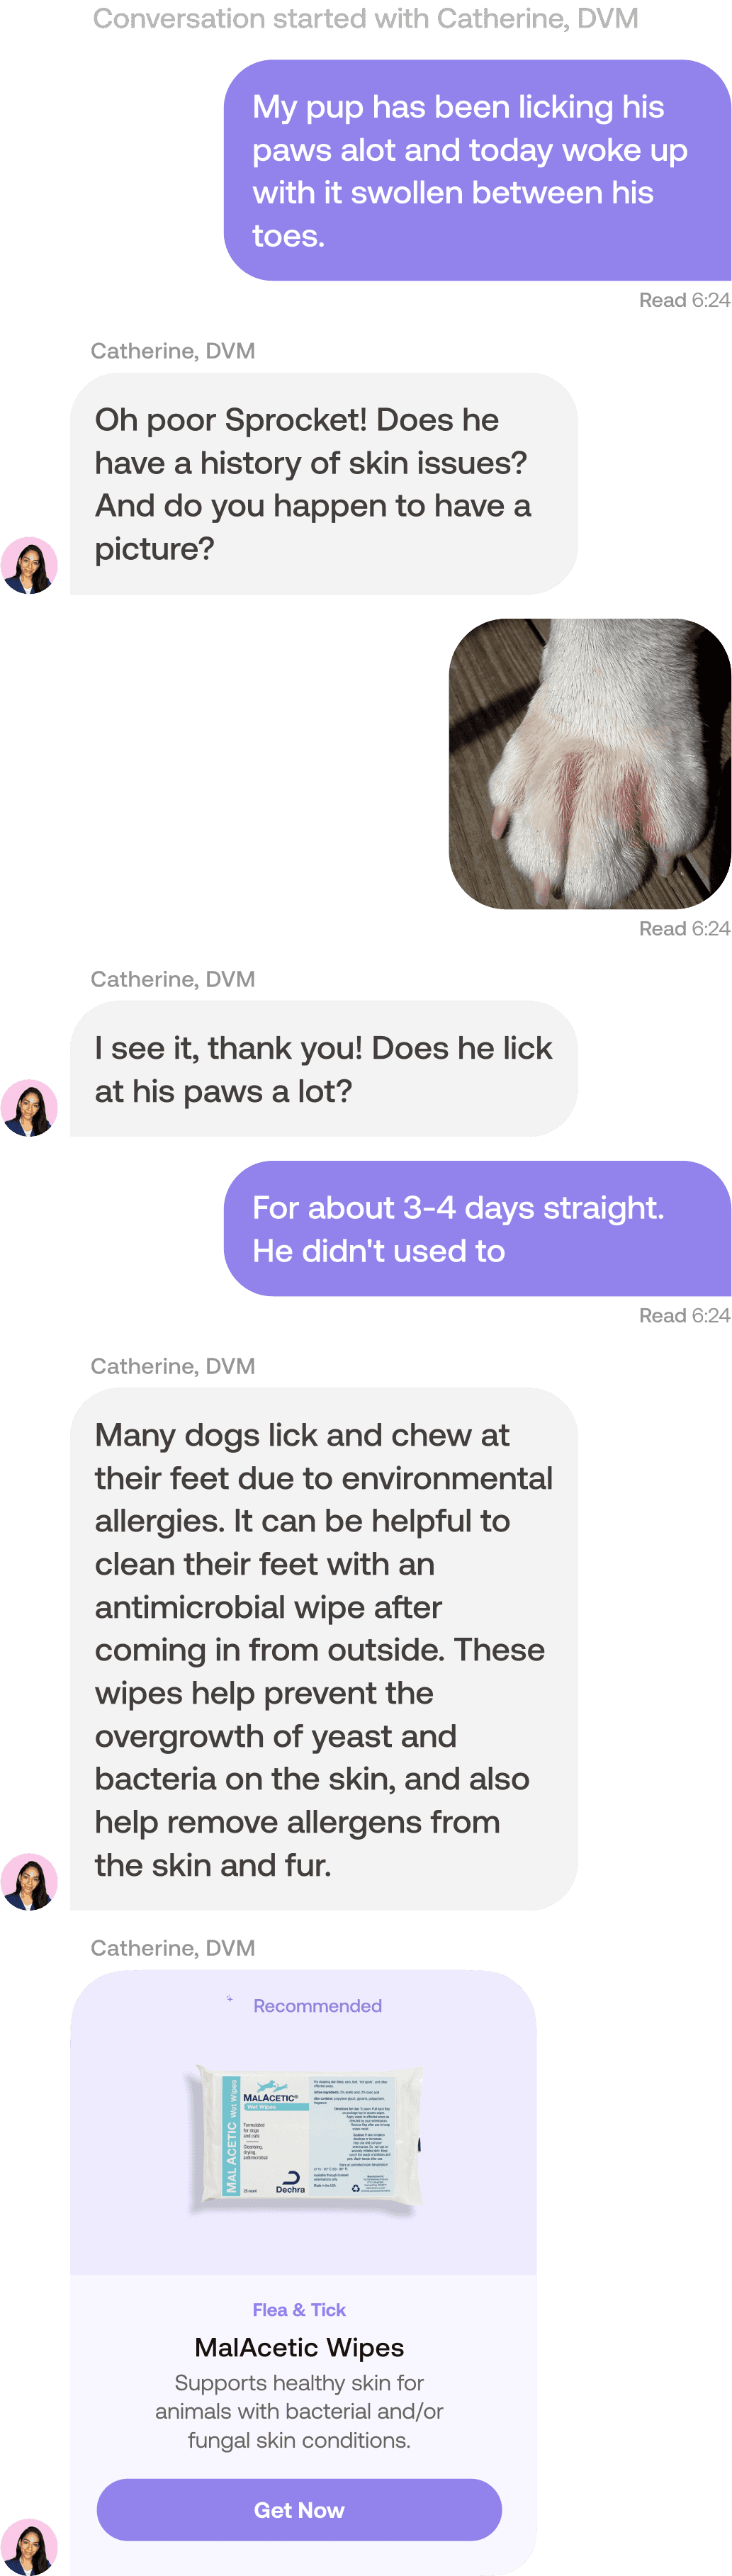 a Pawp vet conversation with text and recommendation